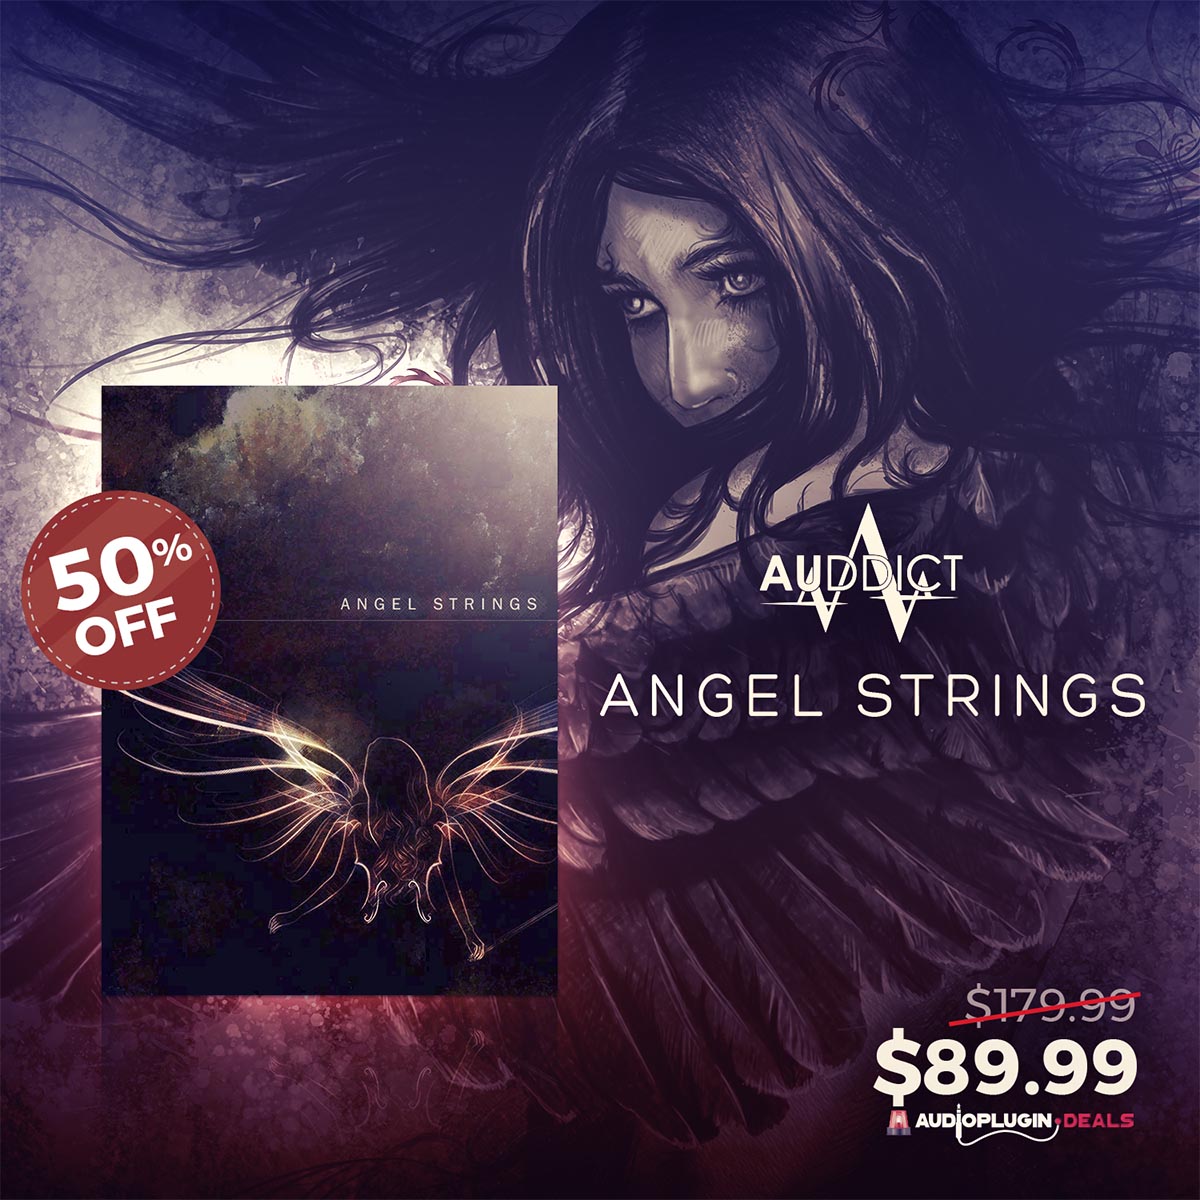 Angel Strings by Auddict (50% OFF)